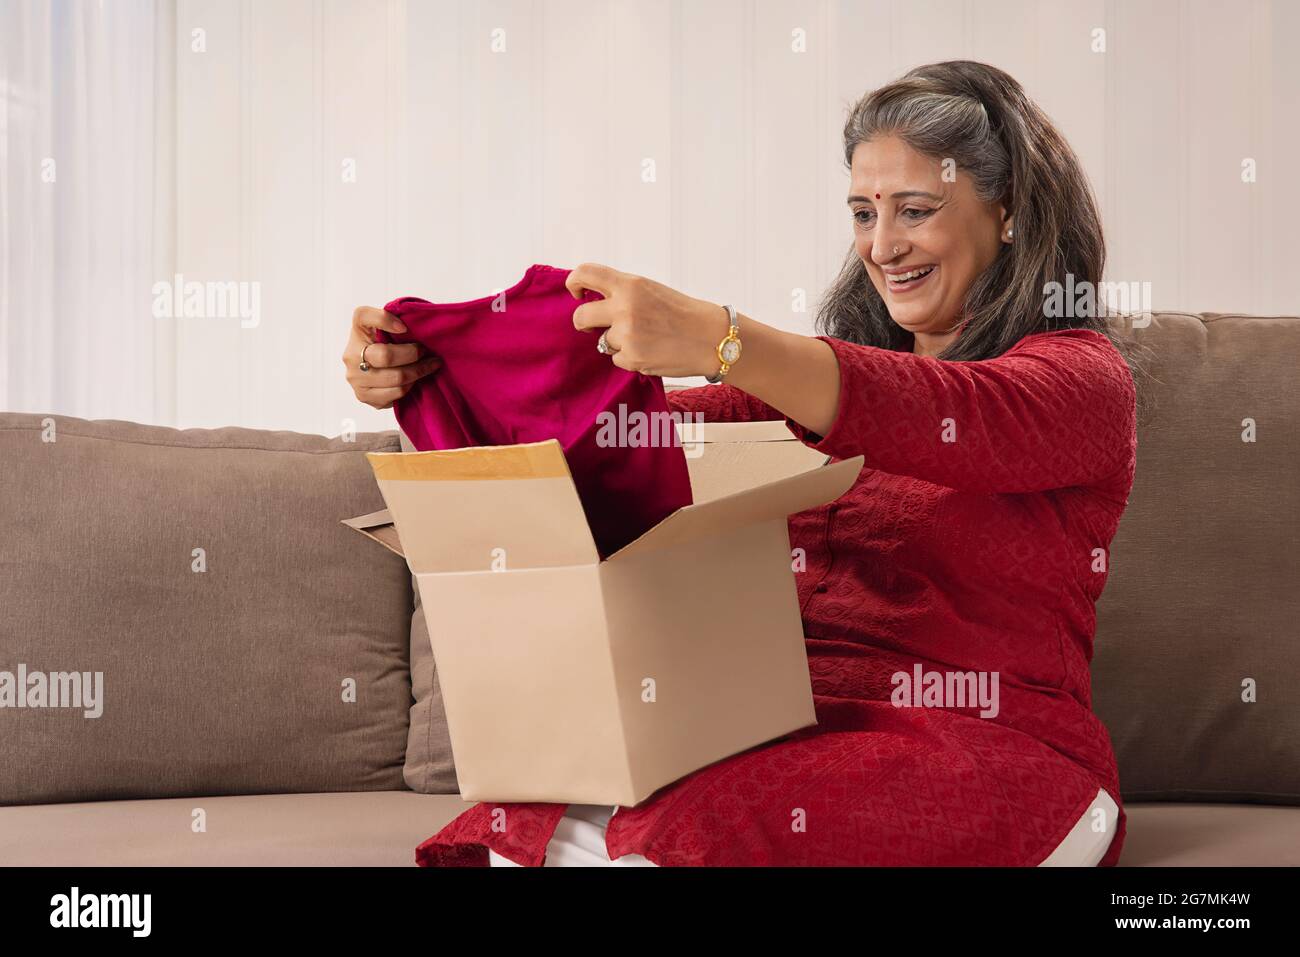 A HAPPY OLD WOMAN LOOKING AT NEW DRESS DELIVERED THROUGH COURIER Stock Photo